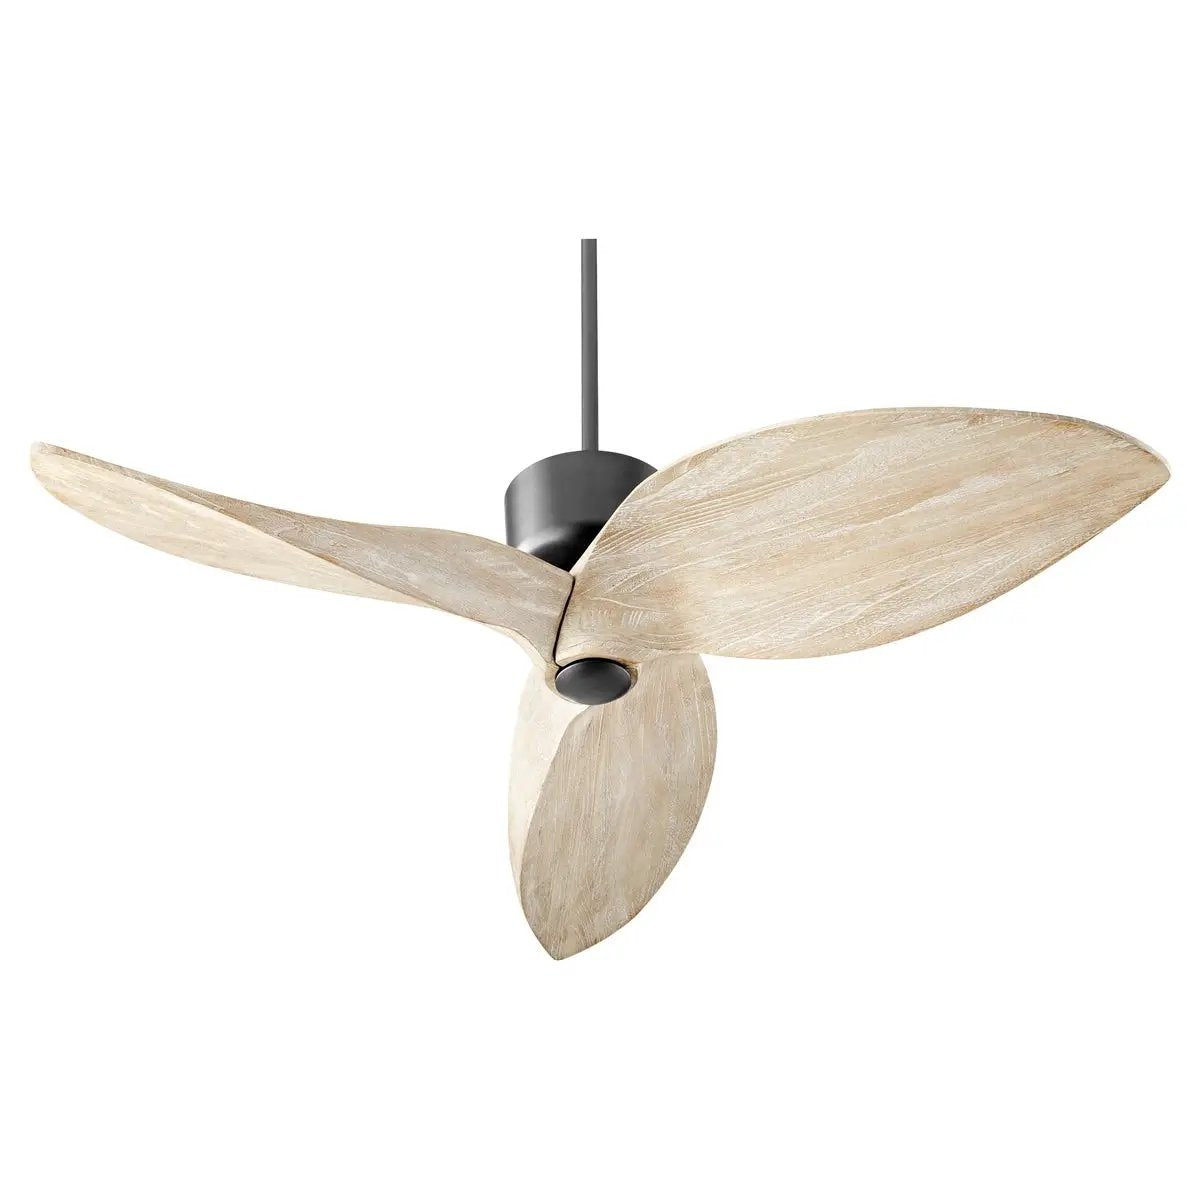 Contemporary Ceiling Fan with Distressed Finish and Weathered Oak Blades, 52" Blade Sweep, 45 Degree Pitch. Perfect for Boho-Chic, Eclectic, or Modern Farmhouse Spaces. Quorum International DC-125NS-30, UL Listed, Dry Location. 18.5"H x 52"W. Limited Lifetime Warranty.